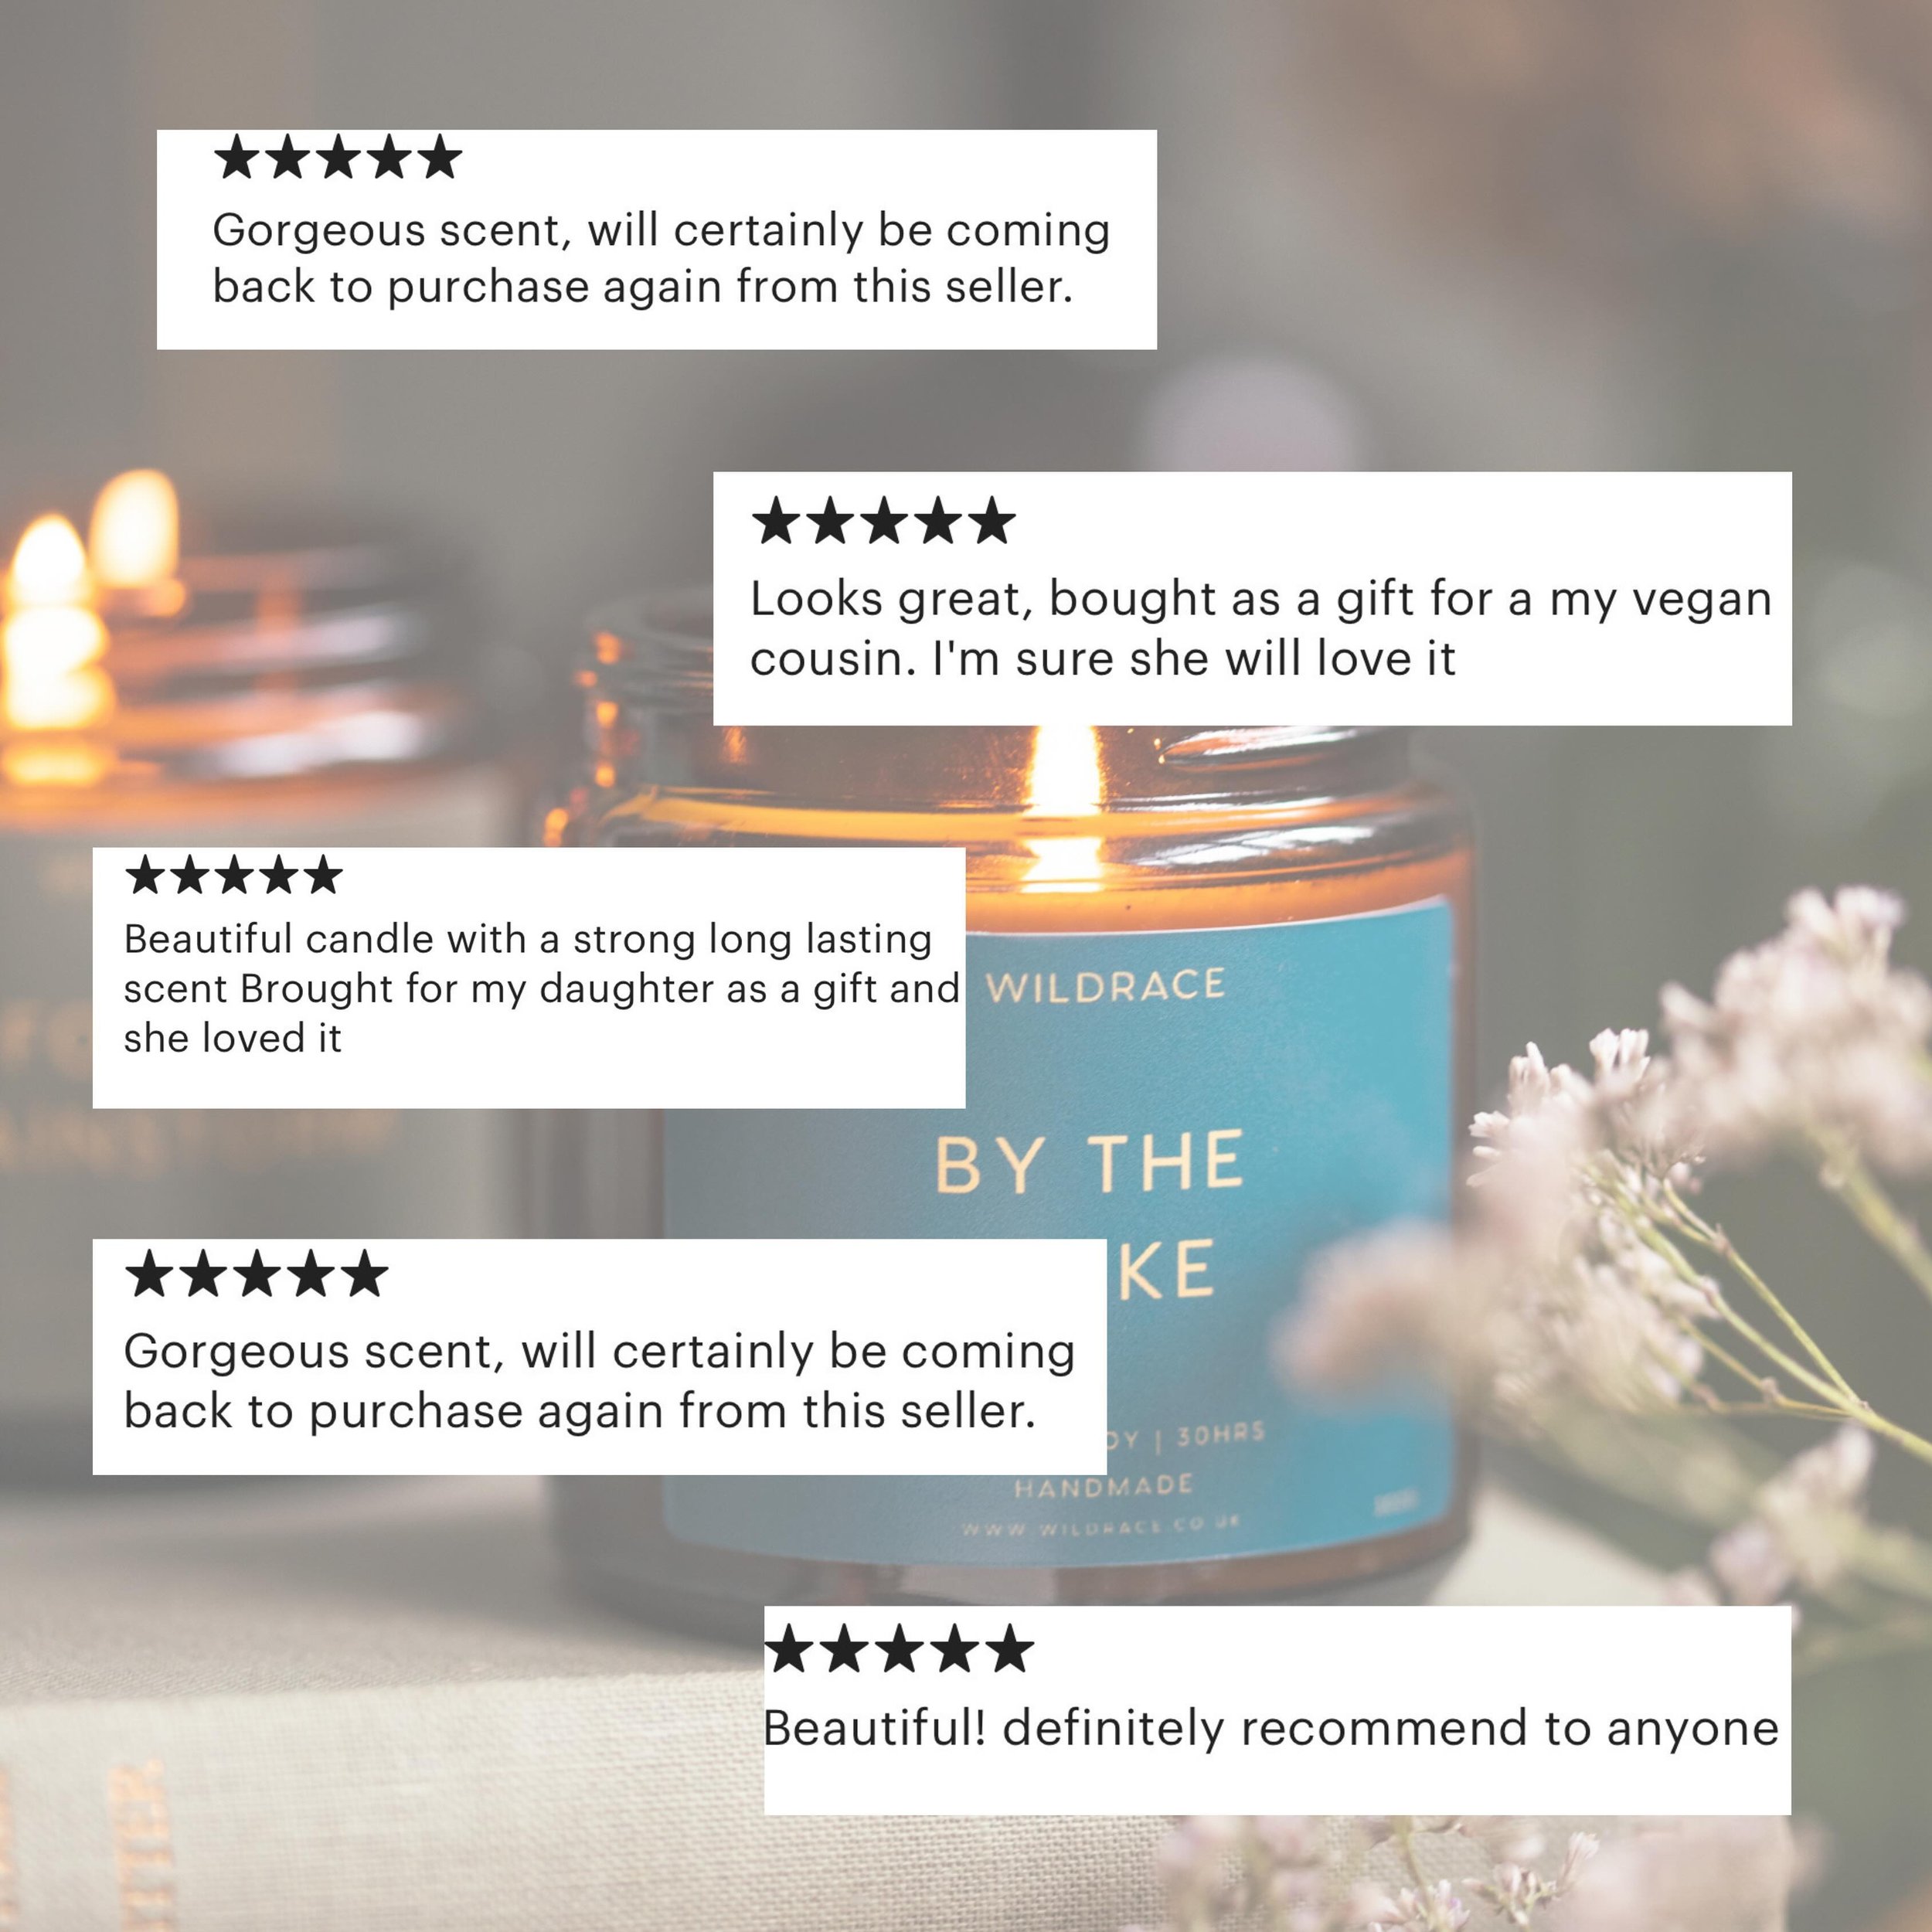 We love 5-star reviews ⭐️⭐️⭐️⭐️⭐️

Did you know we have over 300 5-star reviews across all our selling platforms 🙌

#candlebusiness #candlemakers #wildrace #smallbusinessgrowth